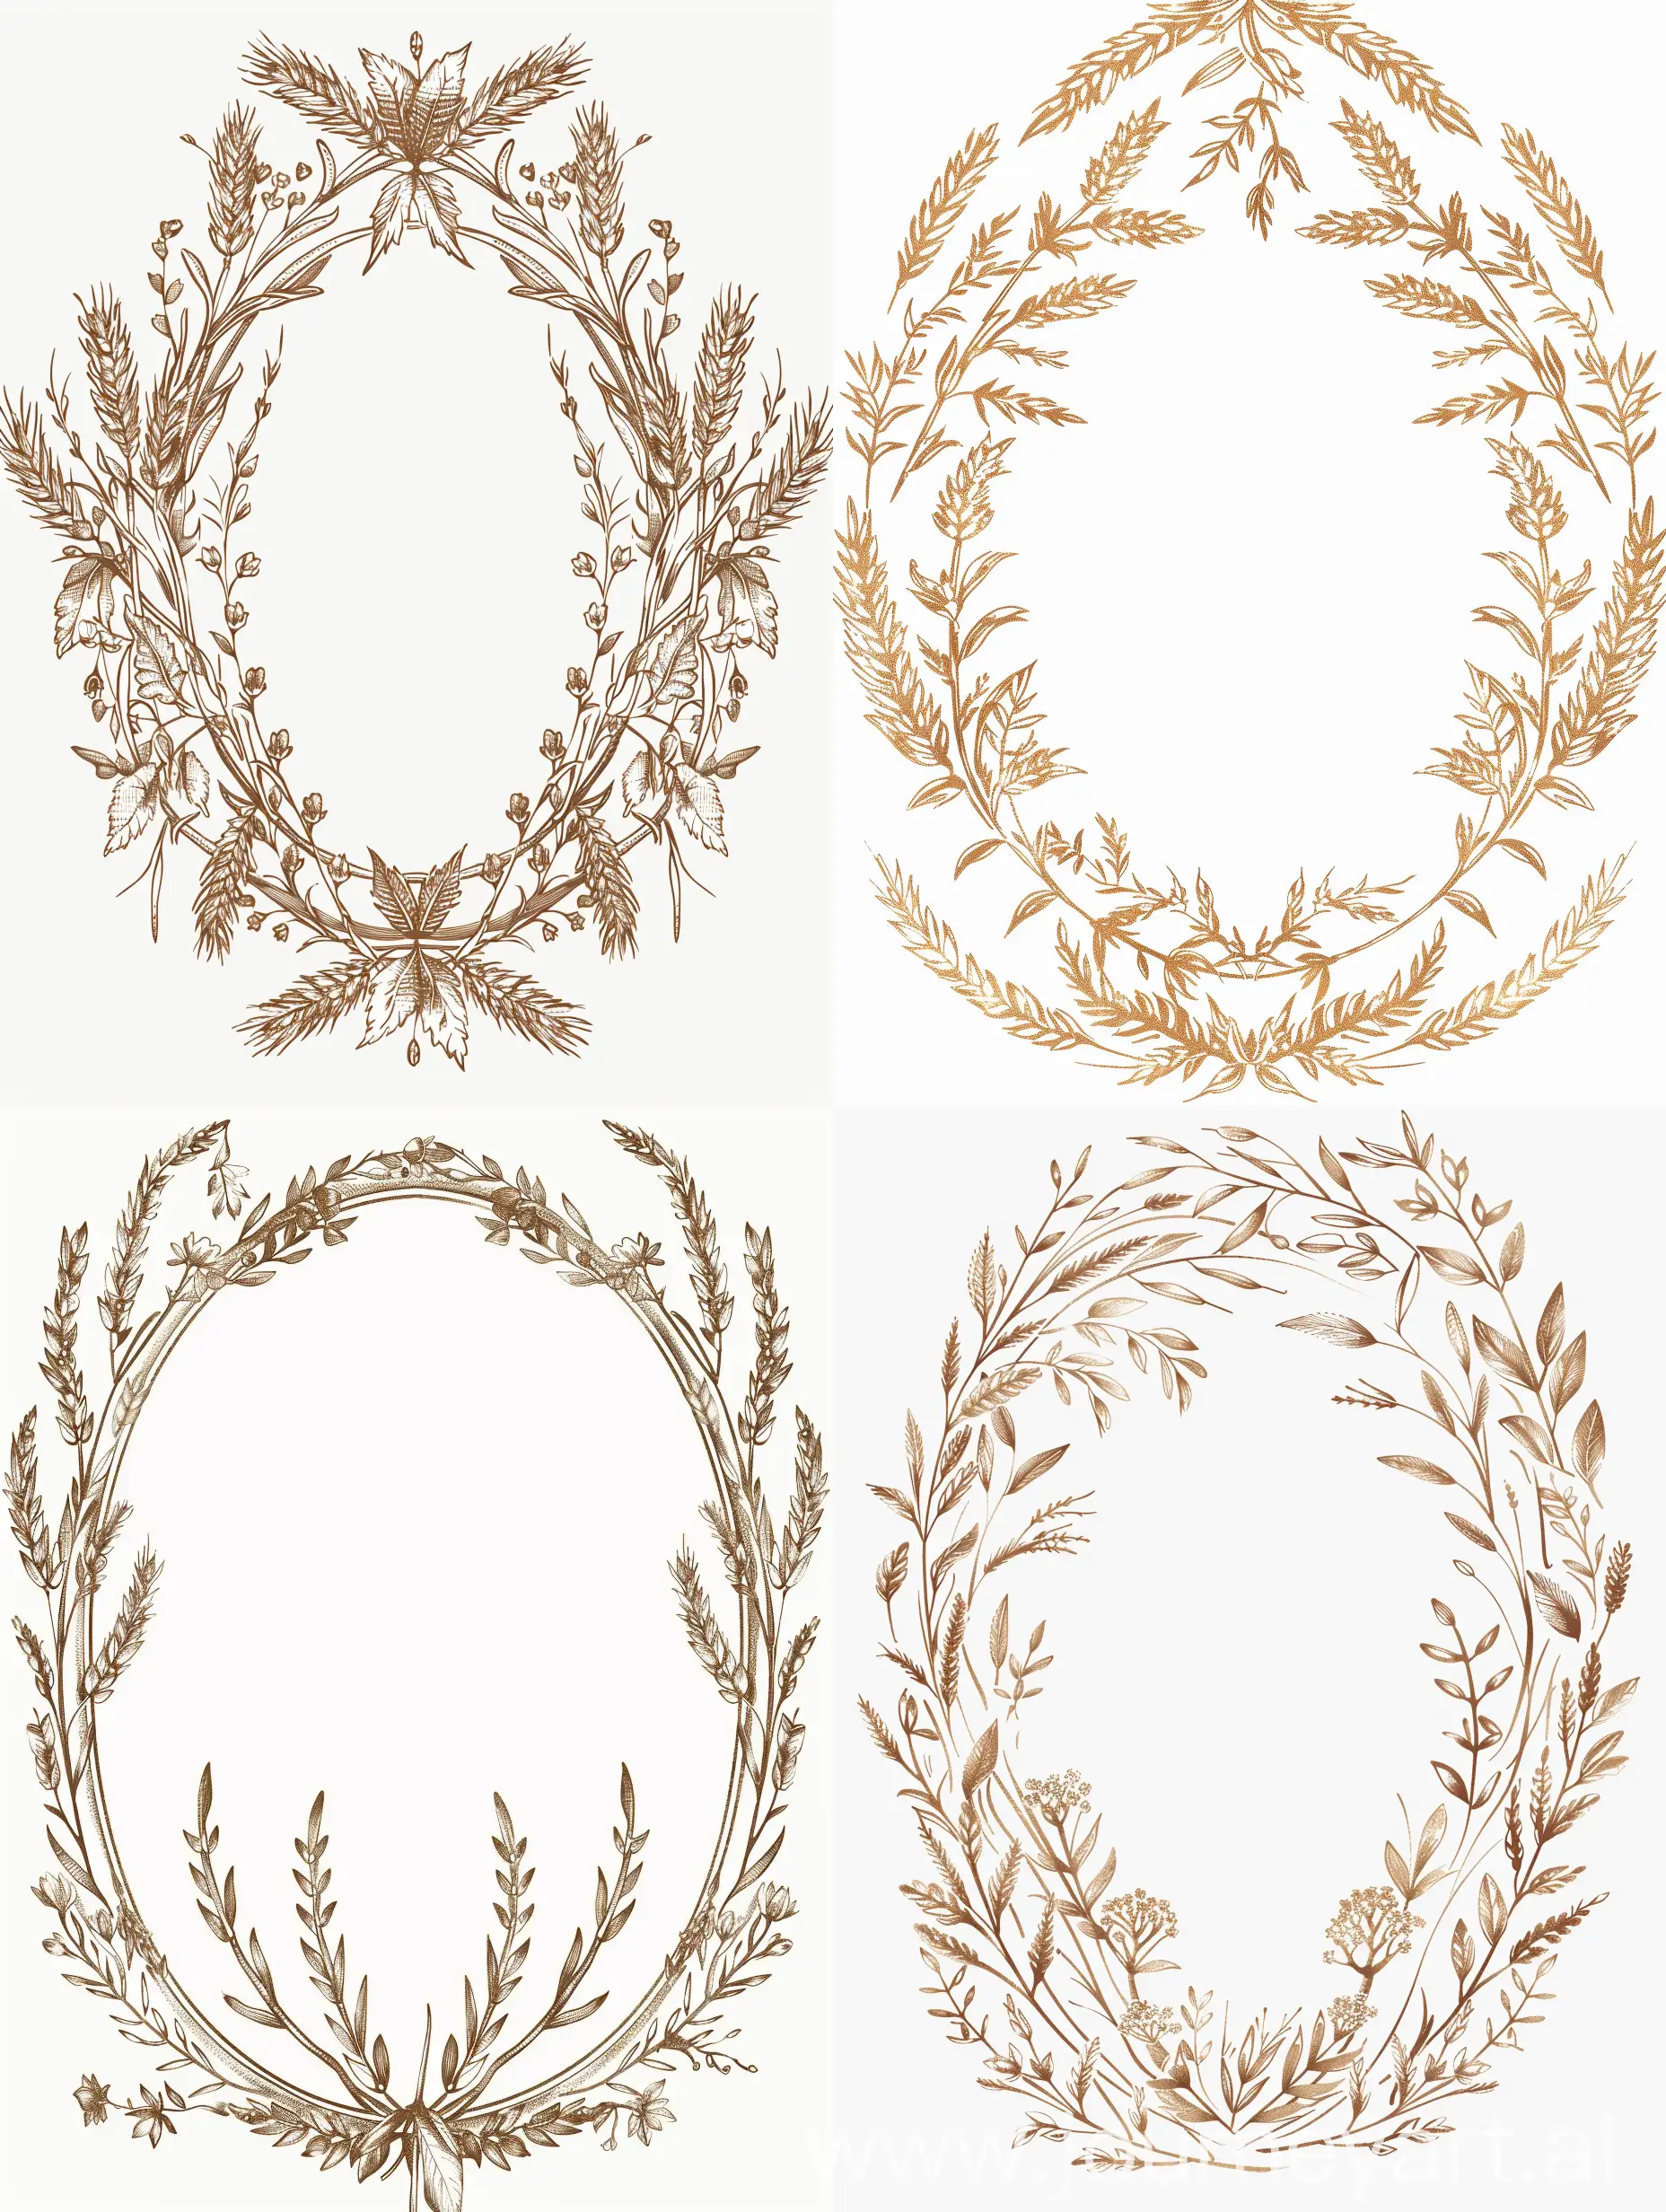 oval frame made of natural elements: spikelets and wheat leaves, beautiful complex ornament of small elements, flat illustration, light brown ink on a white background.